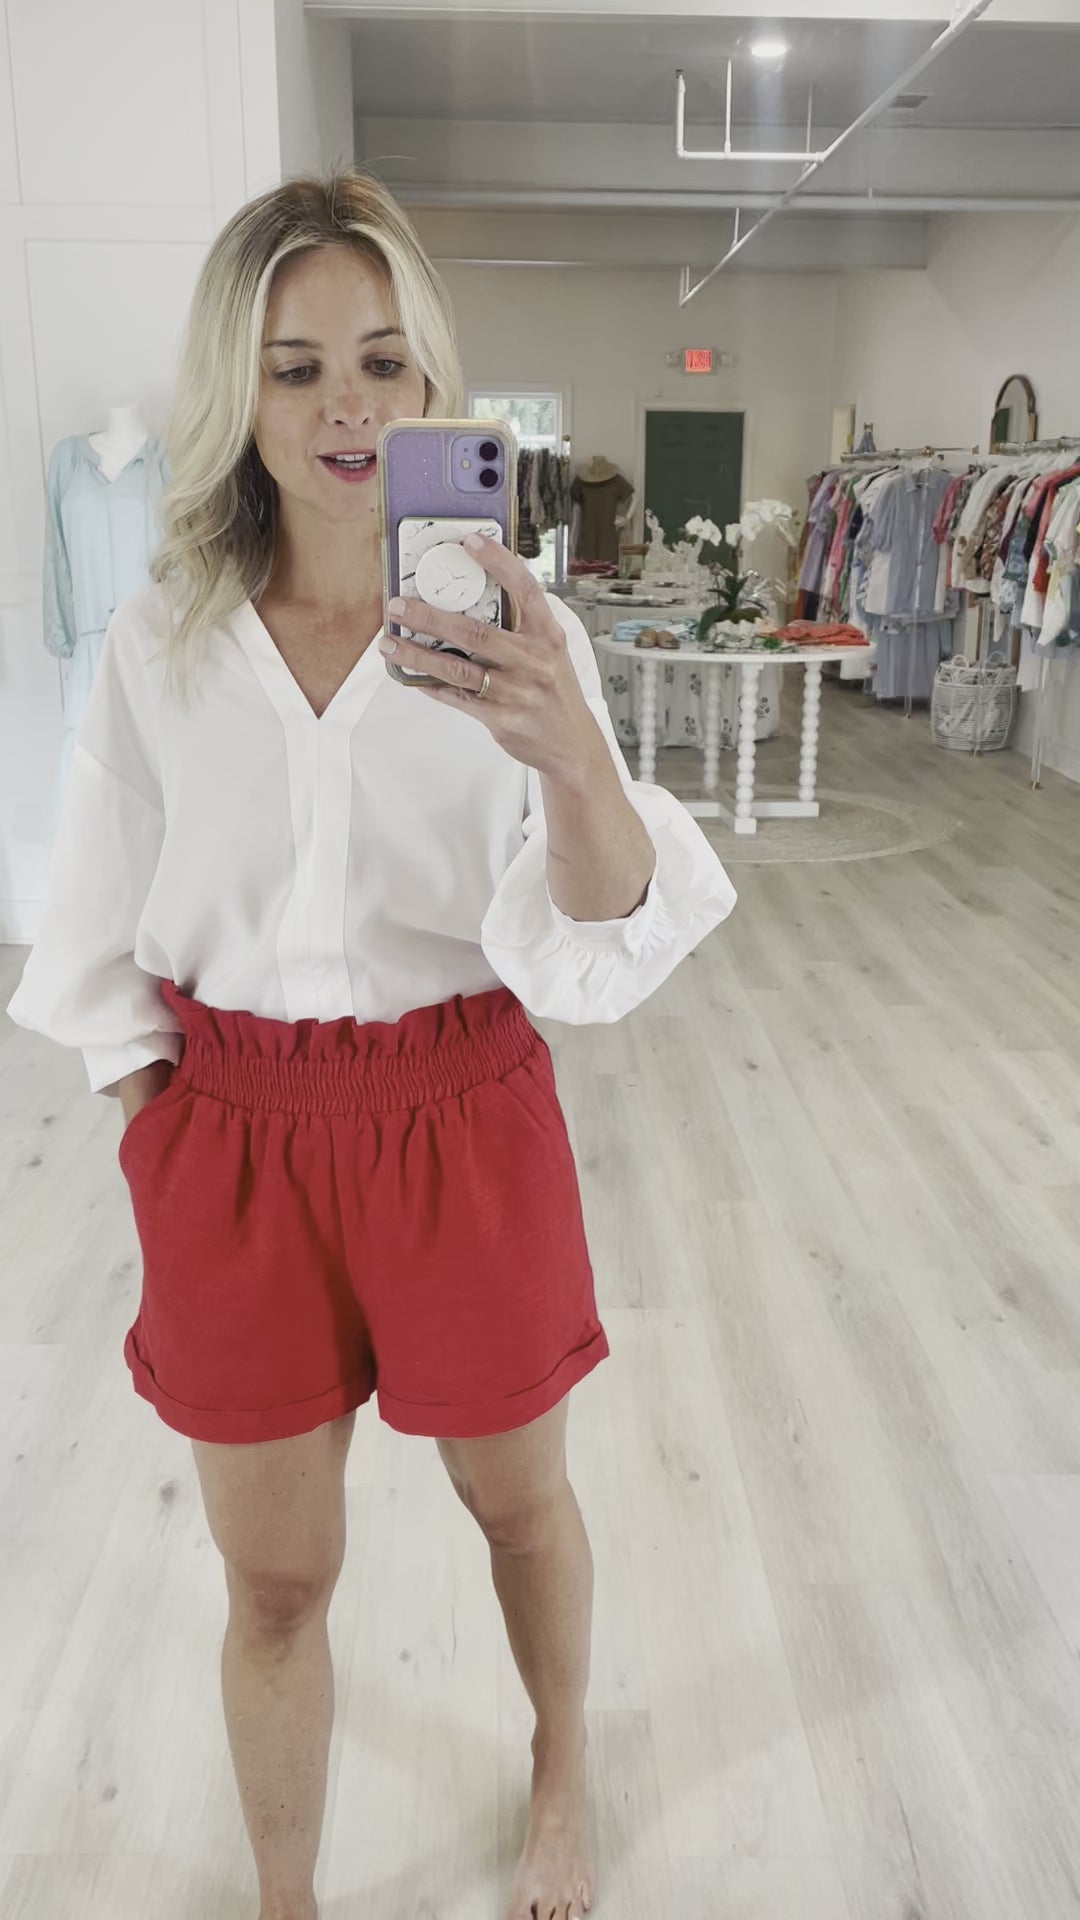 Red Relaxed Fit Shorts